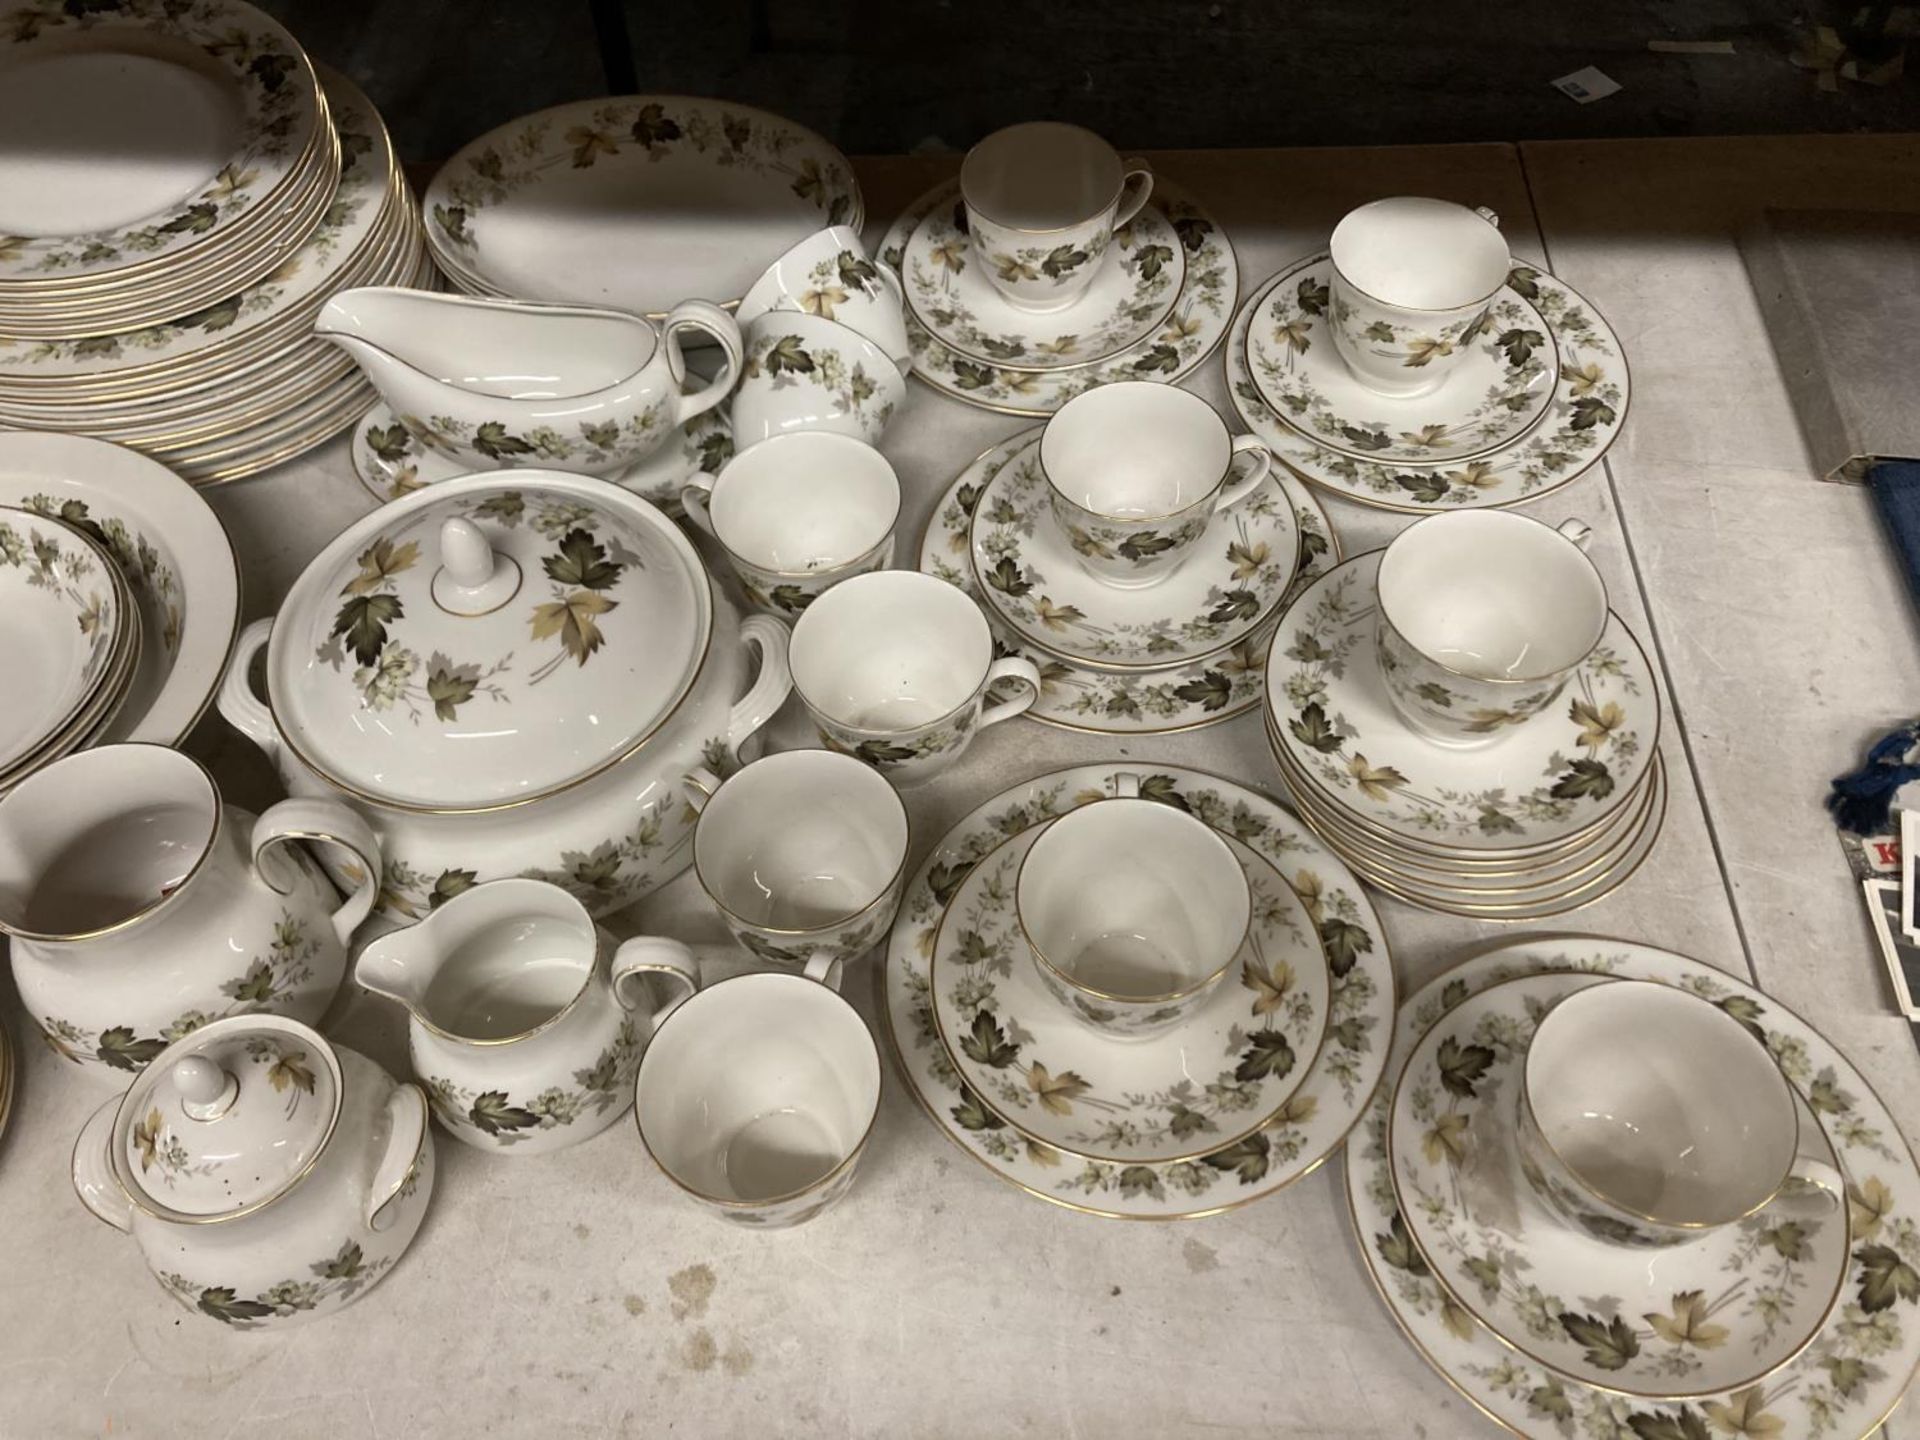 A ROYAL DOULTON 'LARCHMONT' DINNER SERVICE, TO INCLUDE VARIOUS SIZES OF PLATES, A SERVING TUREEN AND - Image 3 of 5